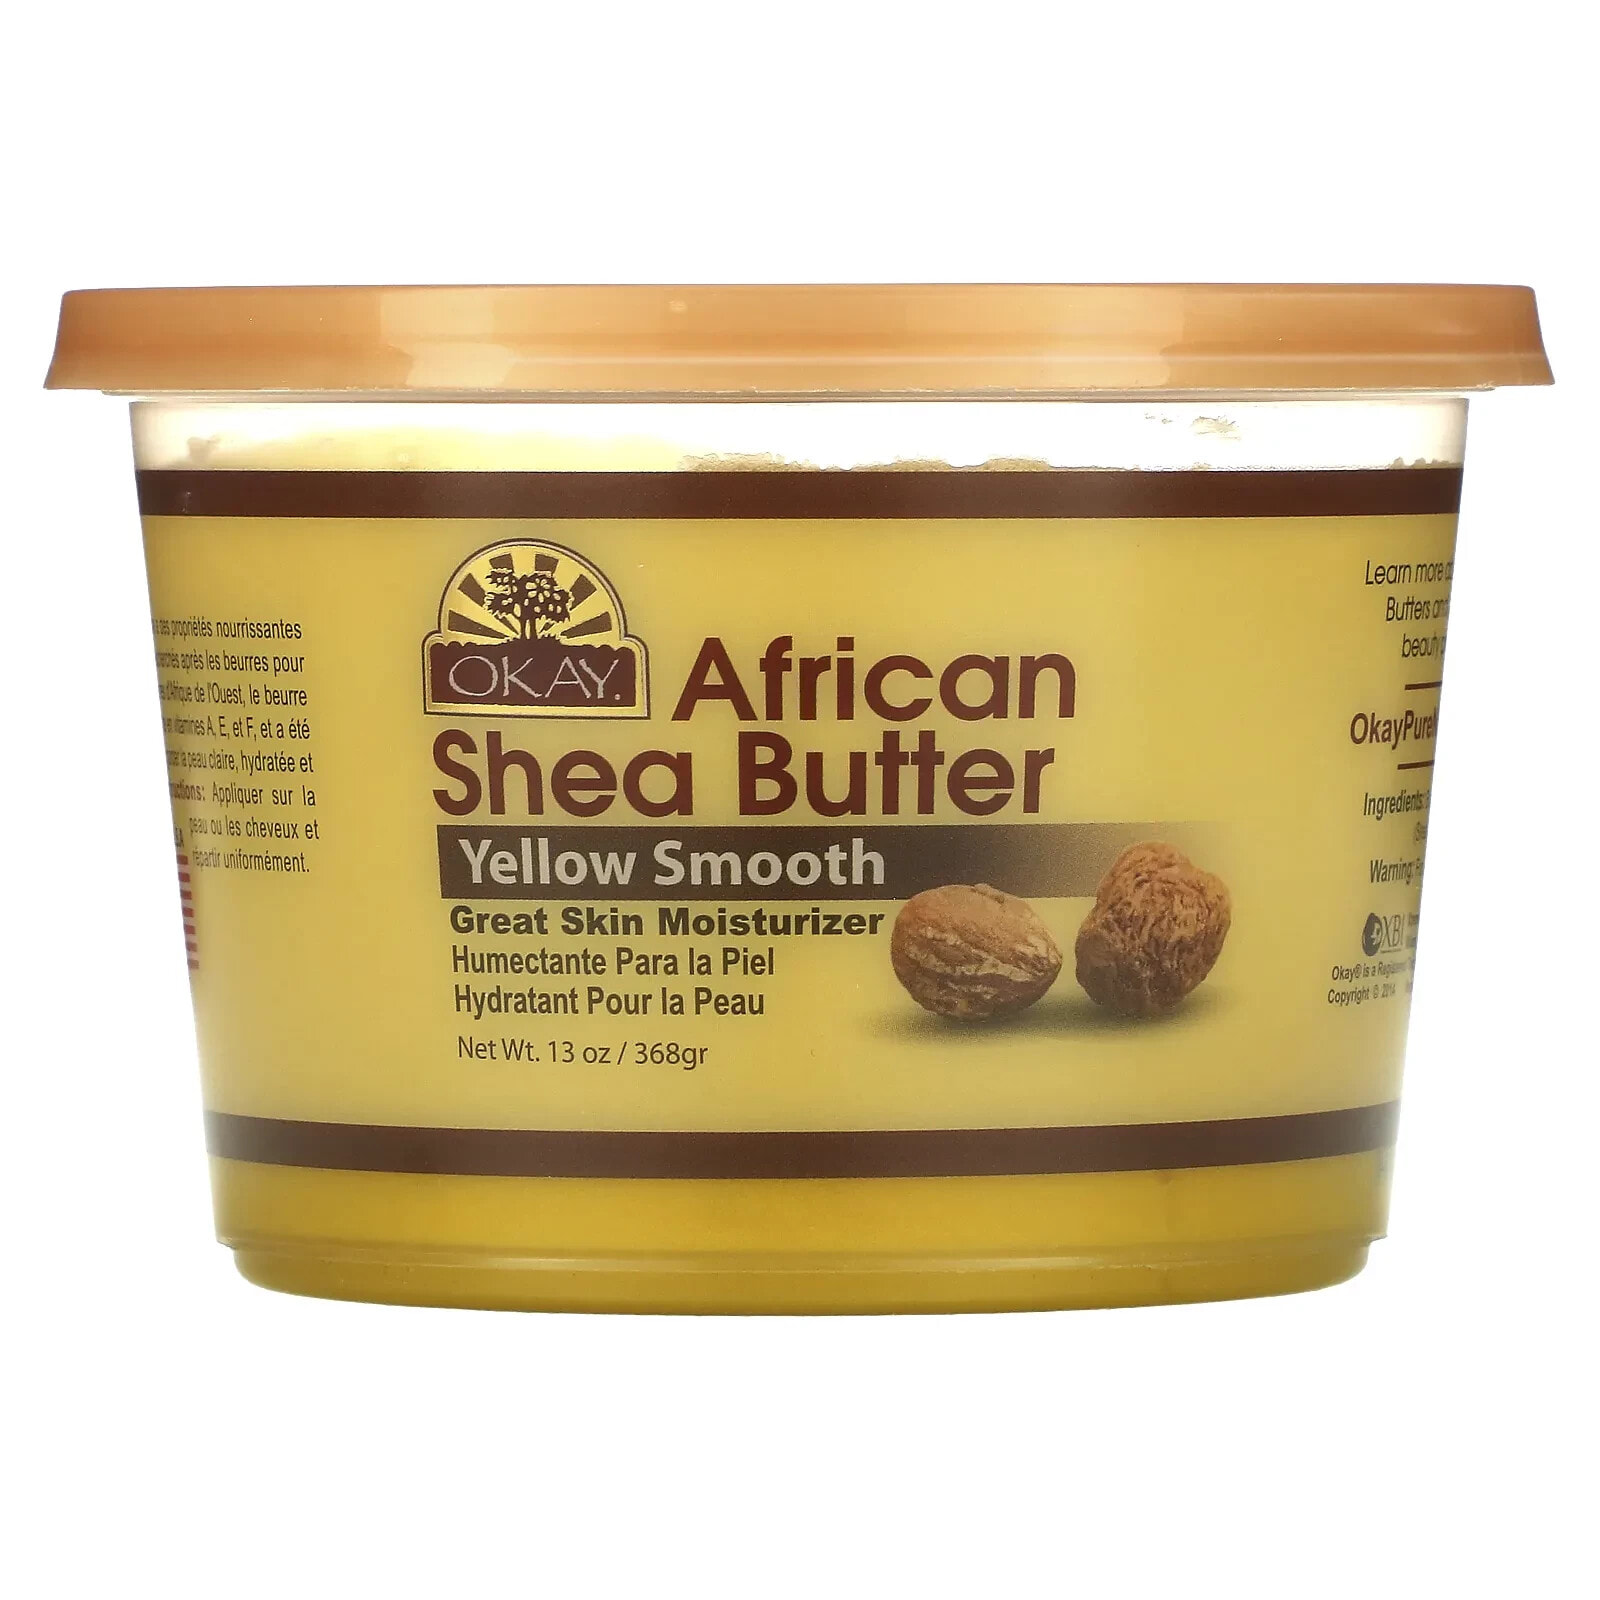 African Shea Butter, Yellow Smooth, 13 oz (368 g)